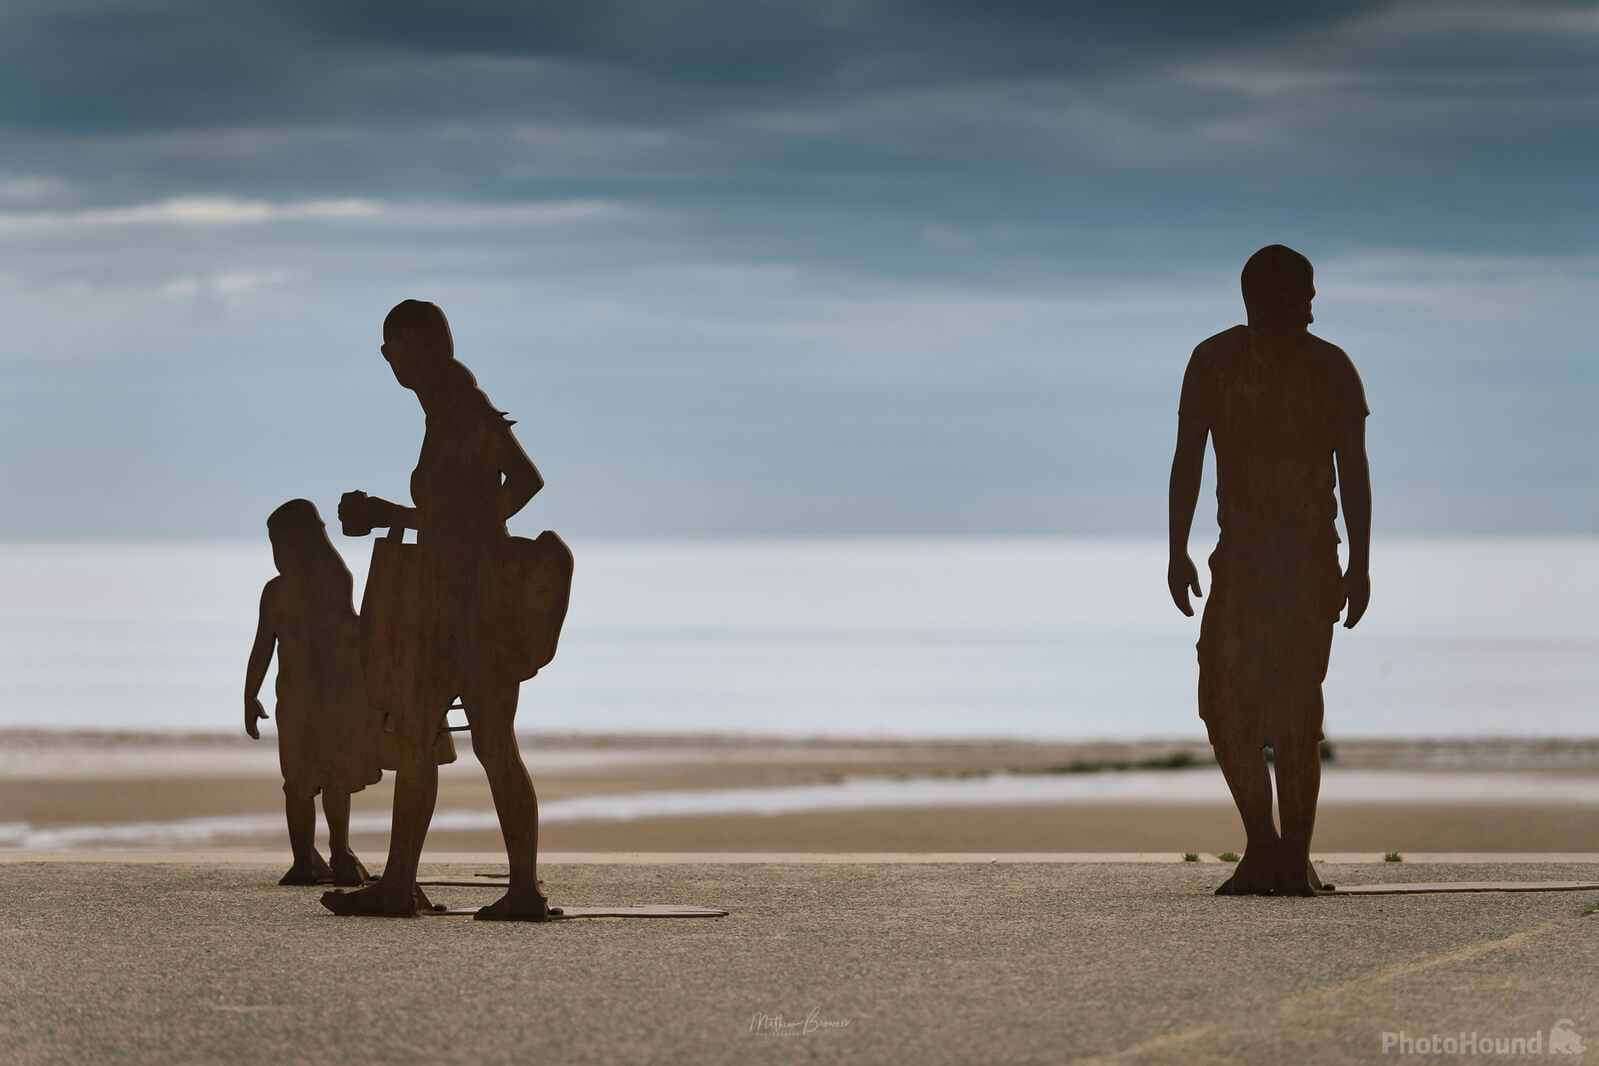 Image of Colwyn Bay Silhouettes by Mathew Browne